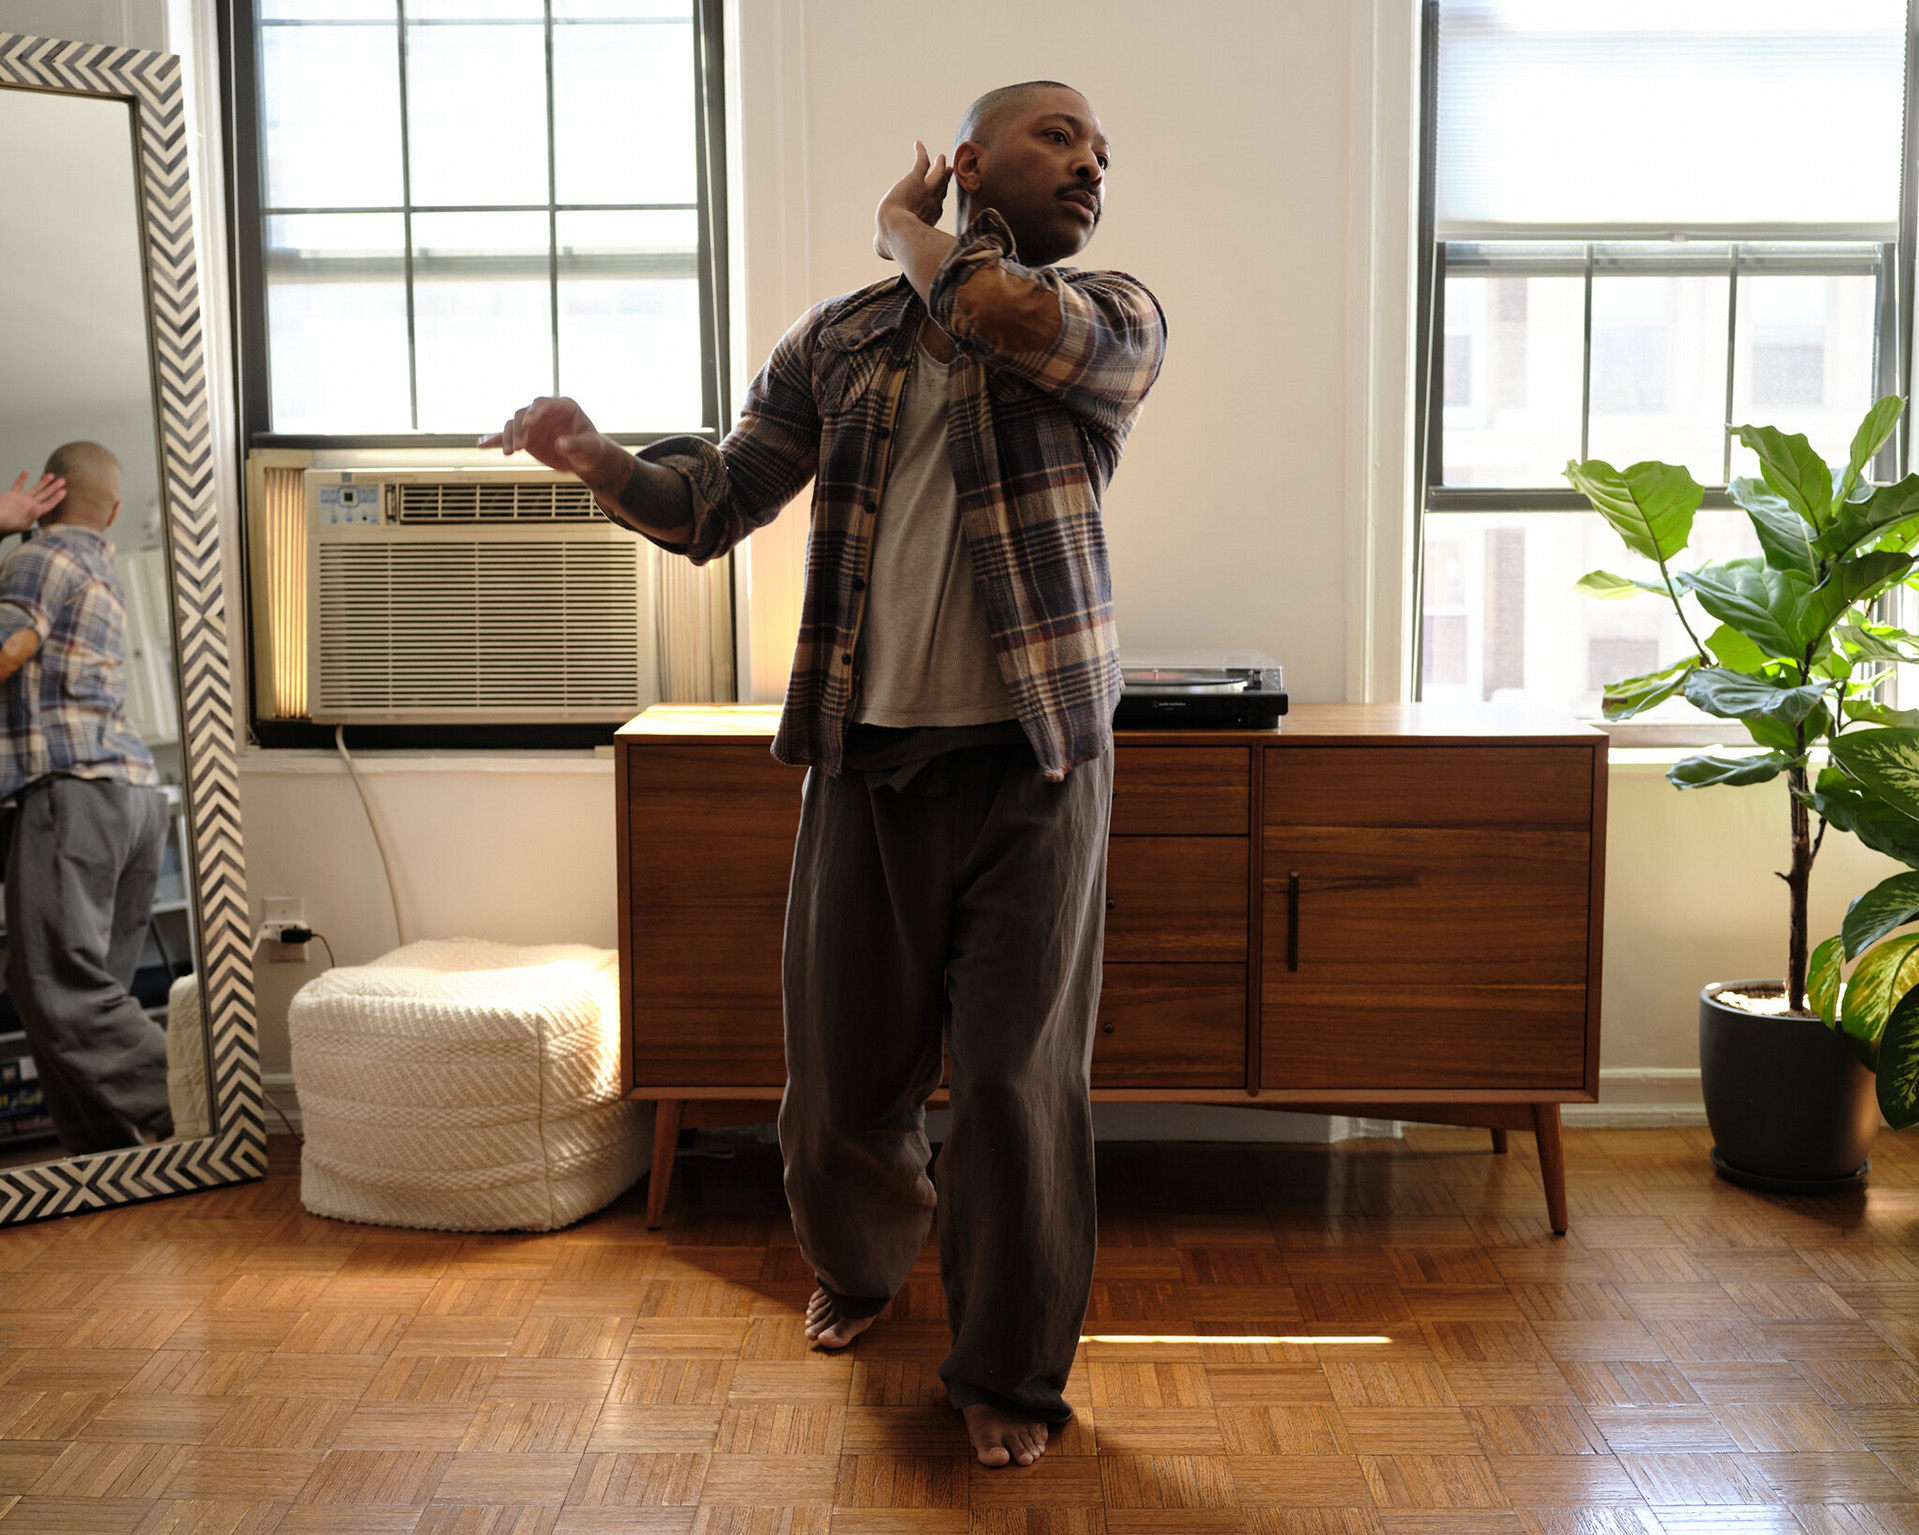 Kyle Abraham in his Brooklyn apartment, courtesy of the New York Times